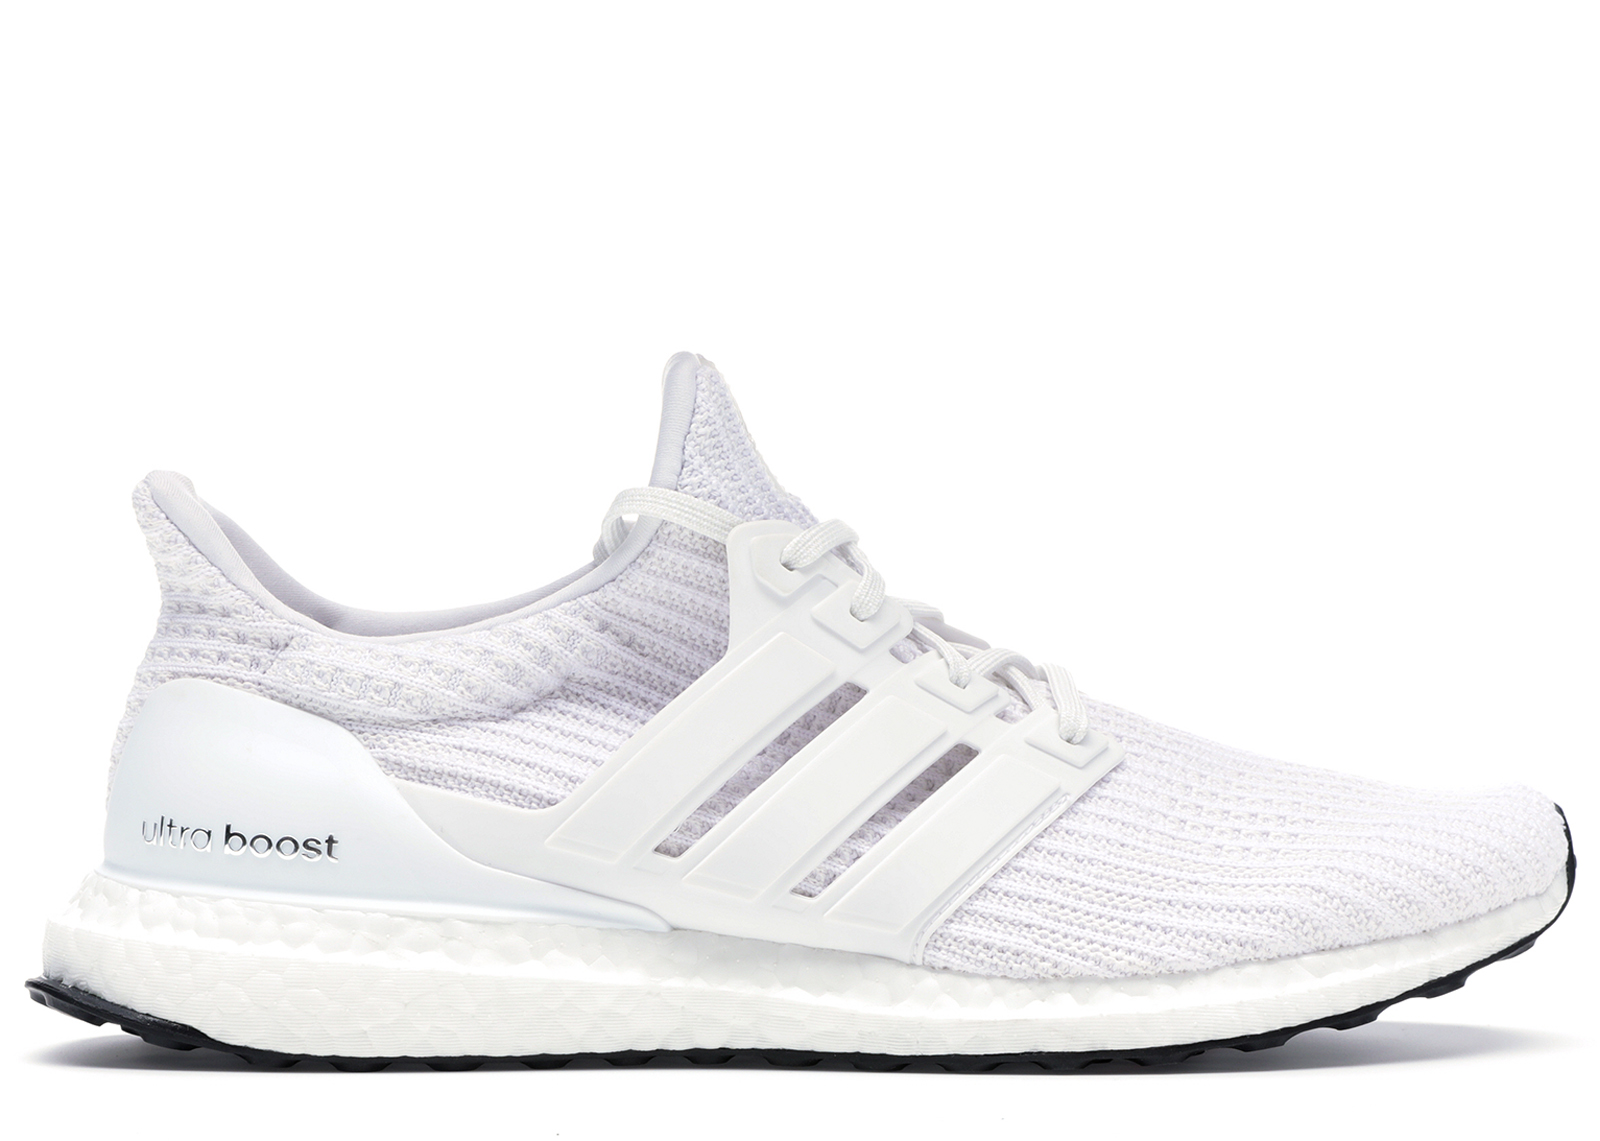 adidas Ultra Boost Shoes - Most Popular